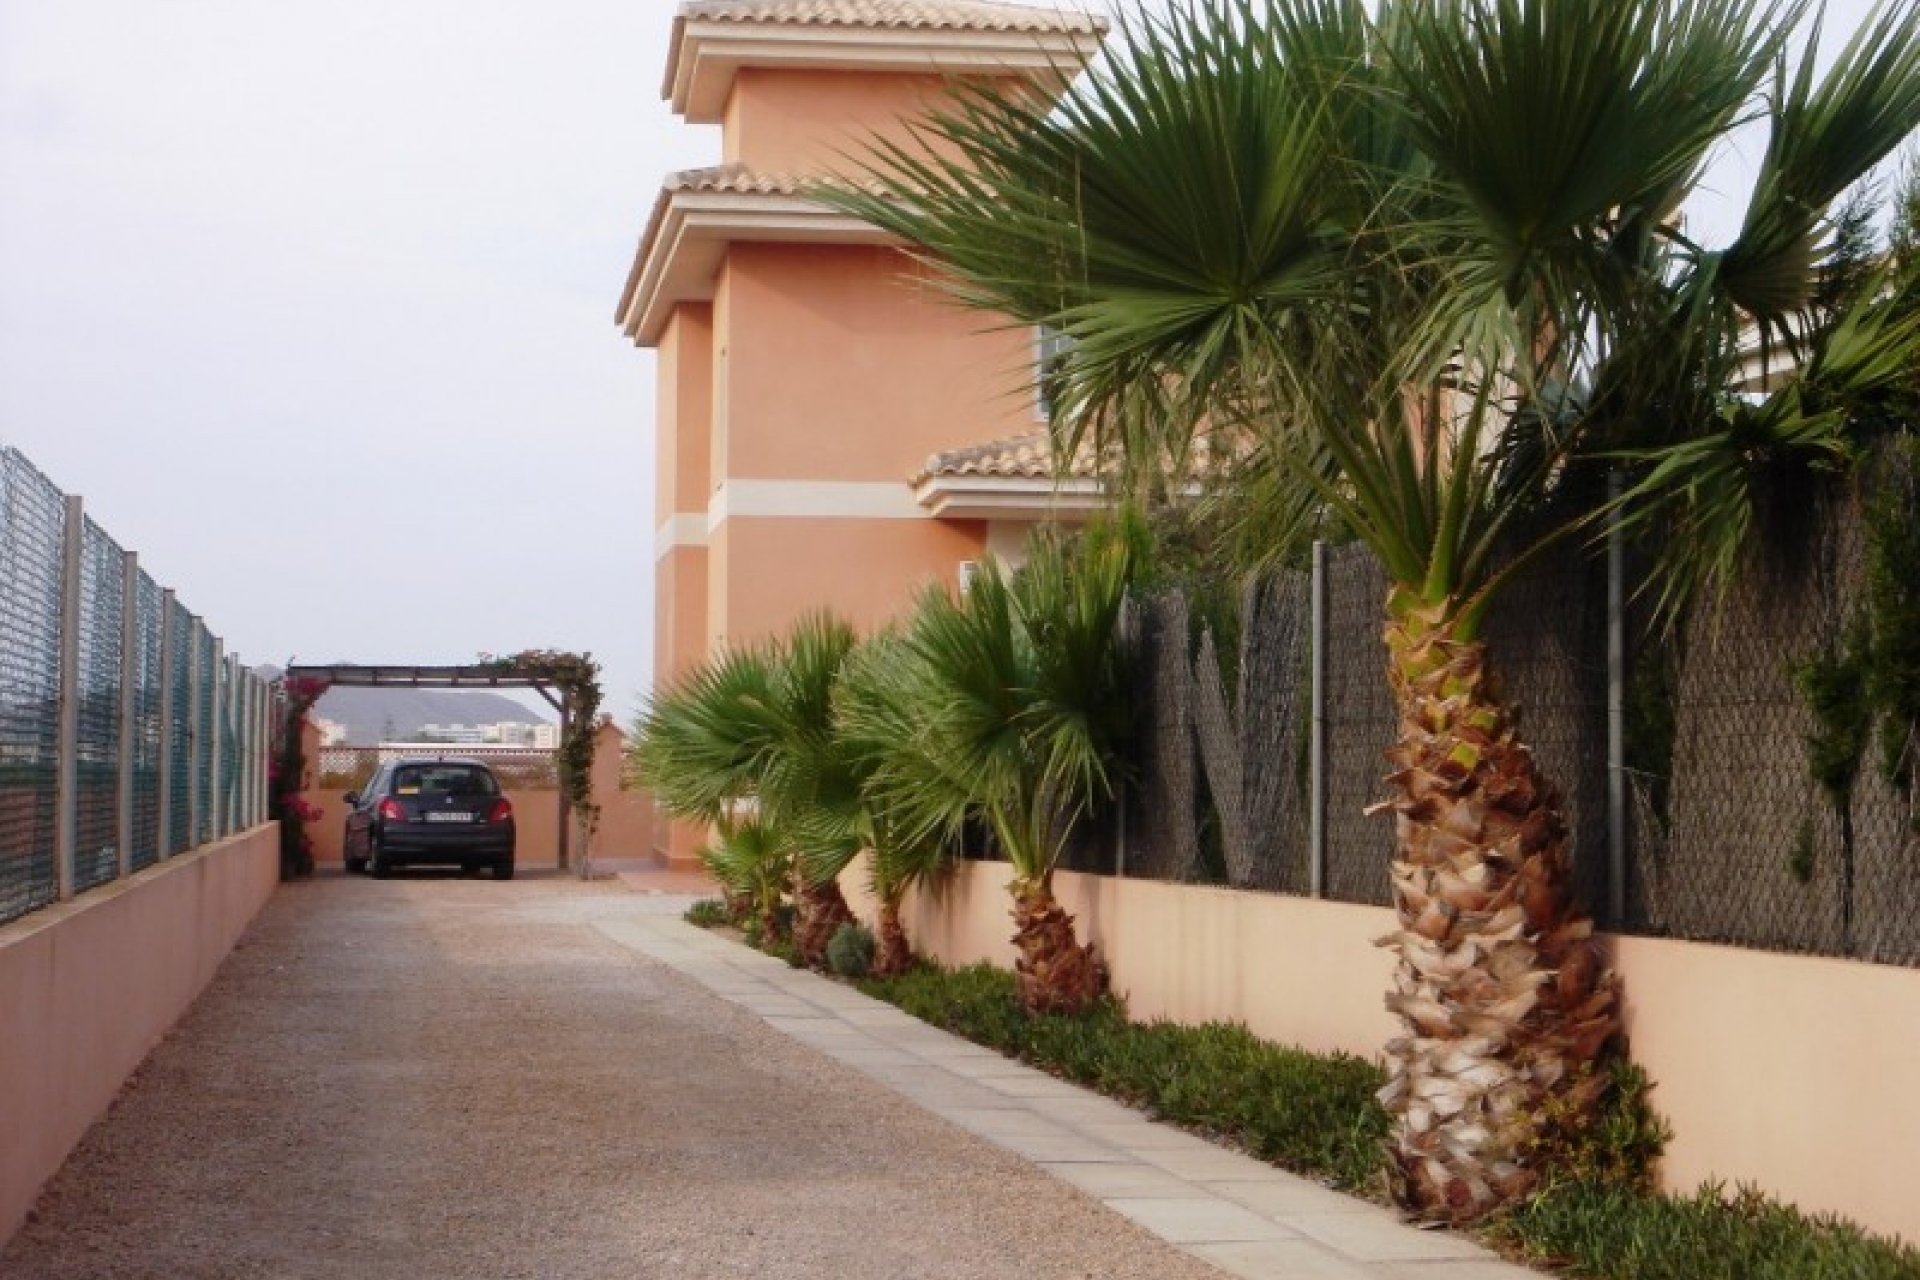 Bargain on Mar Menor for sale cheap in La Manga, close to Murcia and Cartagena, Spainsh property